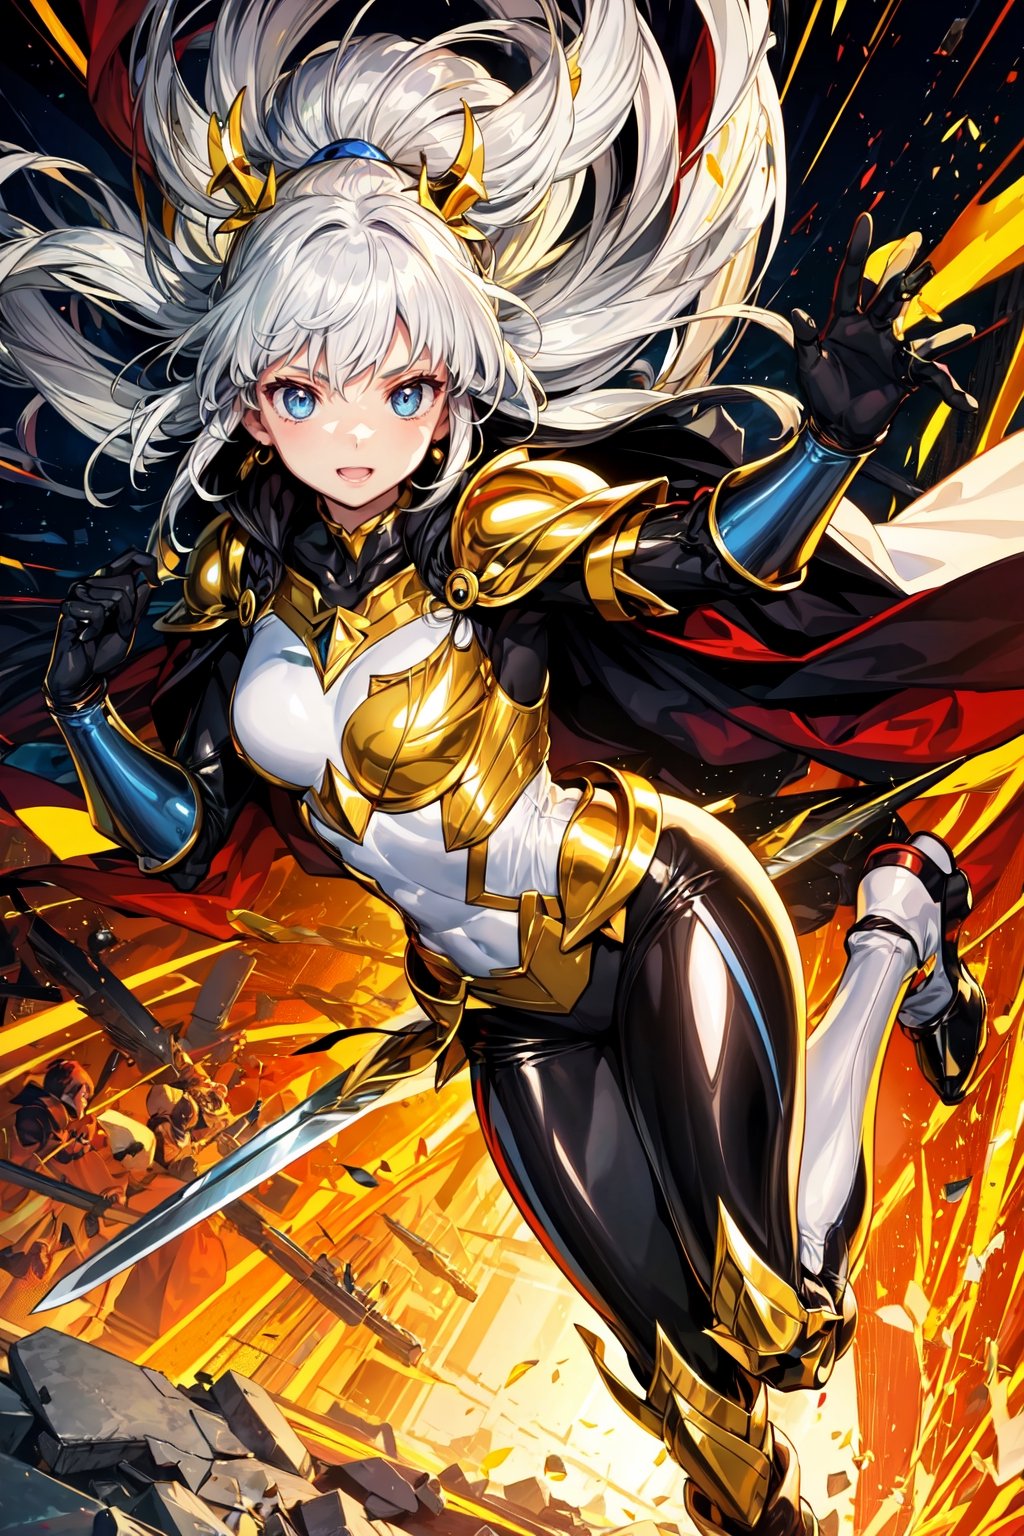 absurdres, highres, ultra detailed,Insane detail in face, ((girl:1.3)), Gold Saint, Saint Seiya Style, Gold Armor, Full body armor, no helmet, Zodiac Knights, Grey hair, fighting pose, Pokemon Gotcha Style, gold gloves, long hair, white long cape, messy_hair, Gold eyes, black pants under armor, full body armor, beautiful old greek temple in the background, beautiful fields, insane detail full leg armor, god aura, sagittarius armor, Elysium fields, ready for battle,FUJI,midjourney, insane detail in armor, ,Film(/FUJI/), (army, crowd of soldiers) swords